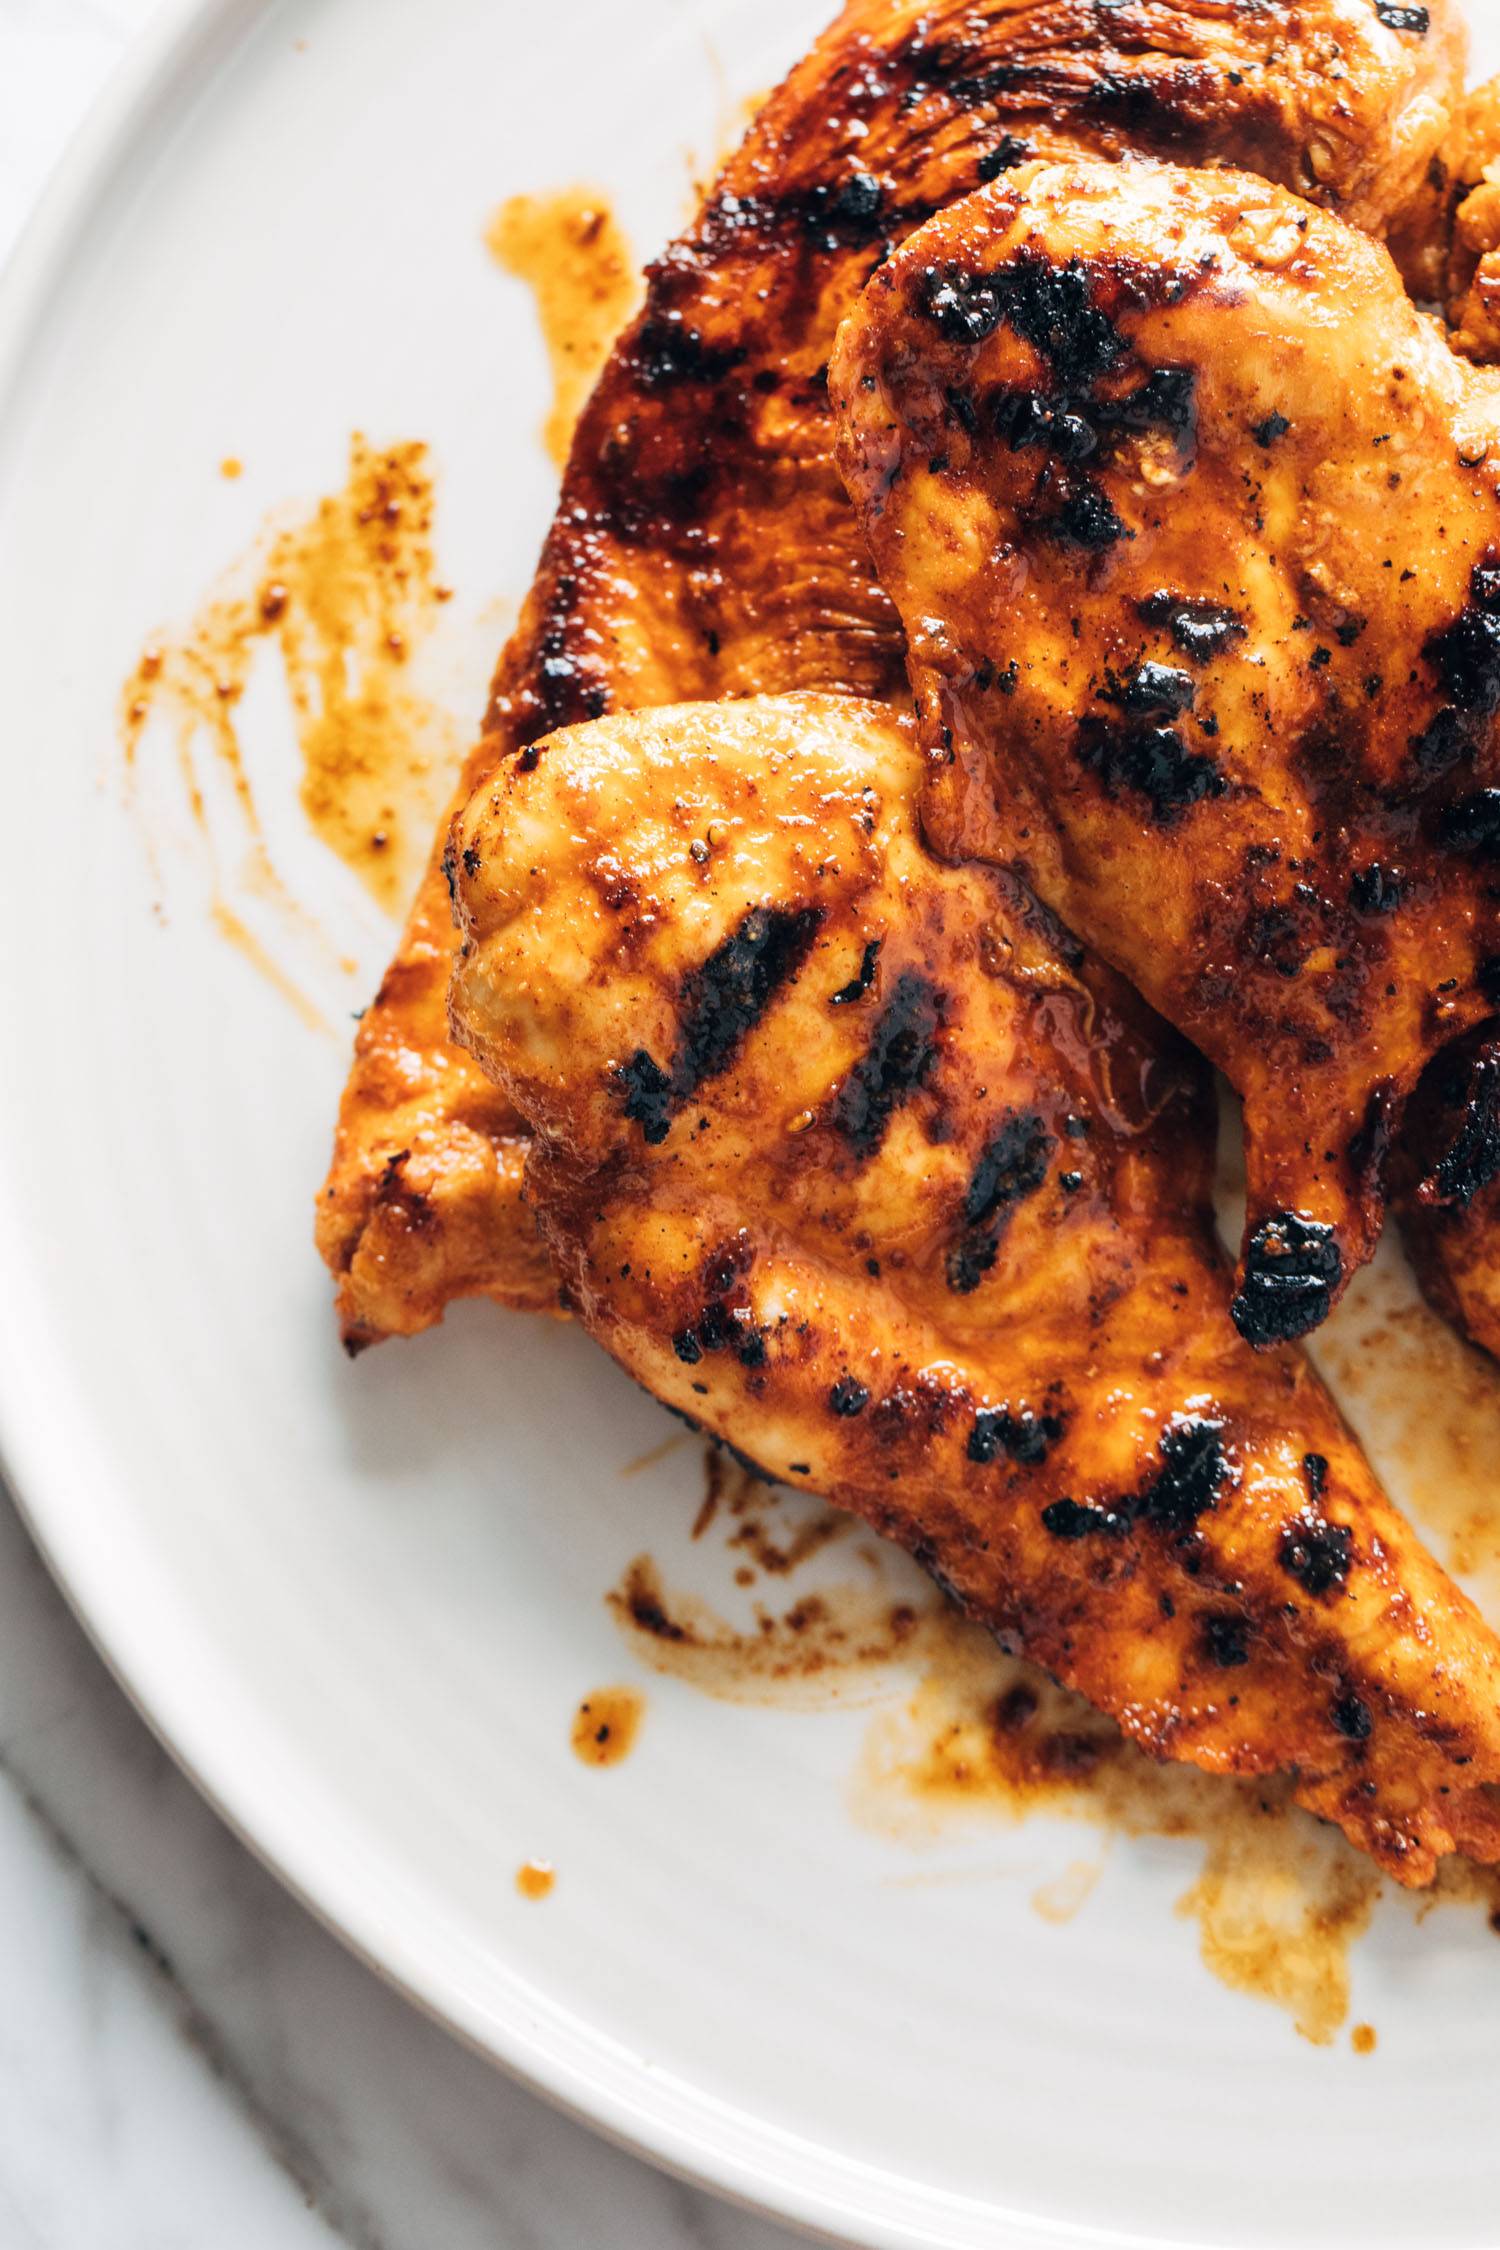 Buffalo chicken breasts on a plate.